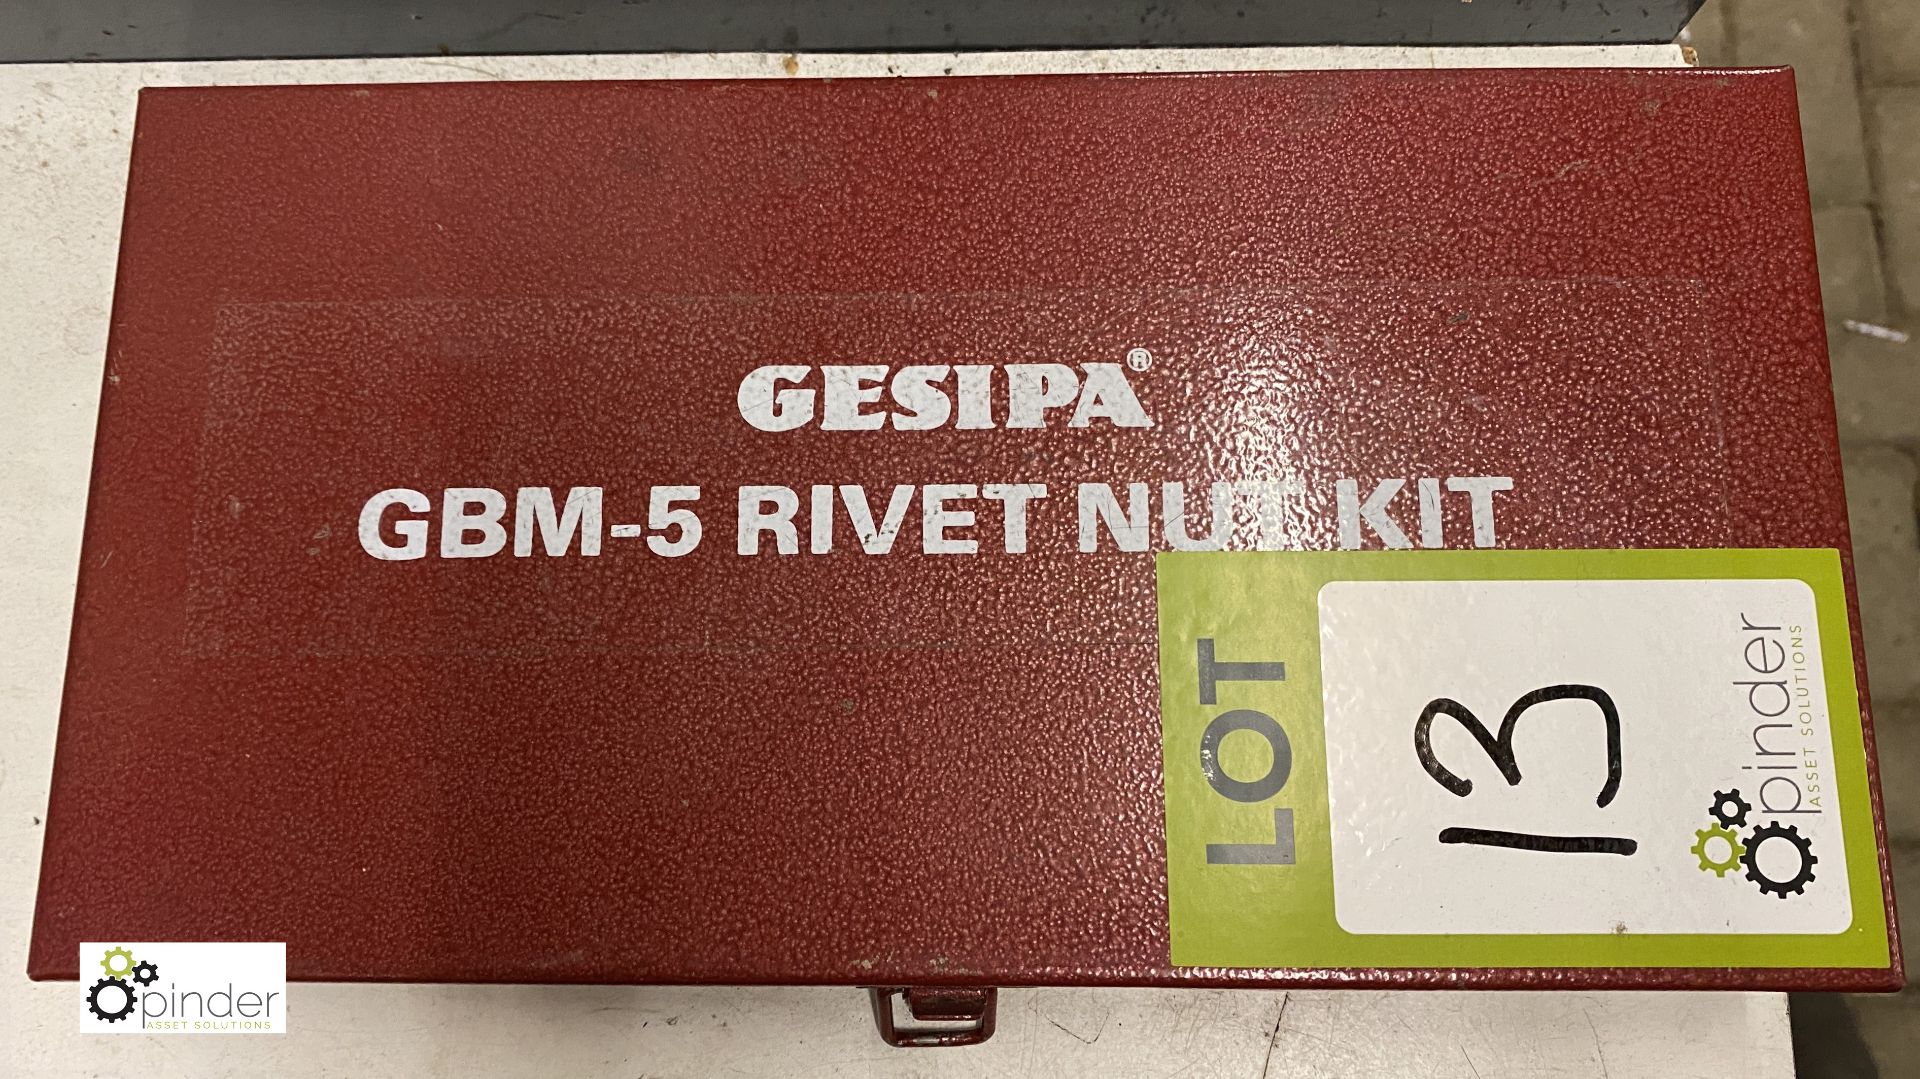 Gesipa GBM-5 Rivet Nut Kit, with case (located in Maintenance Workshop 1) - Image 3 of 3